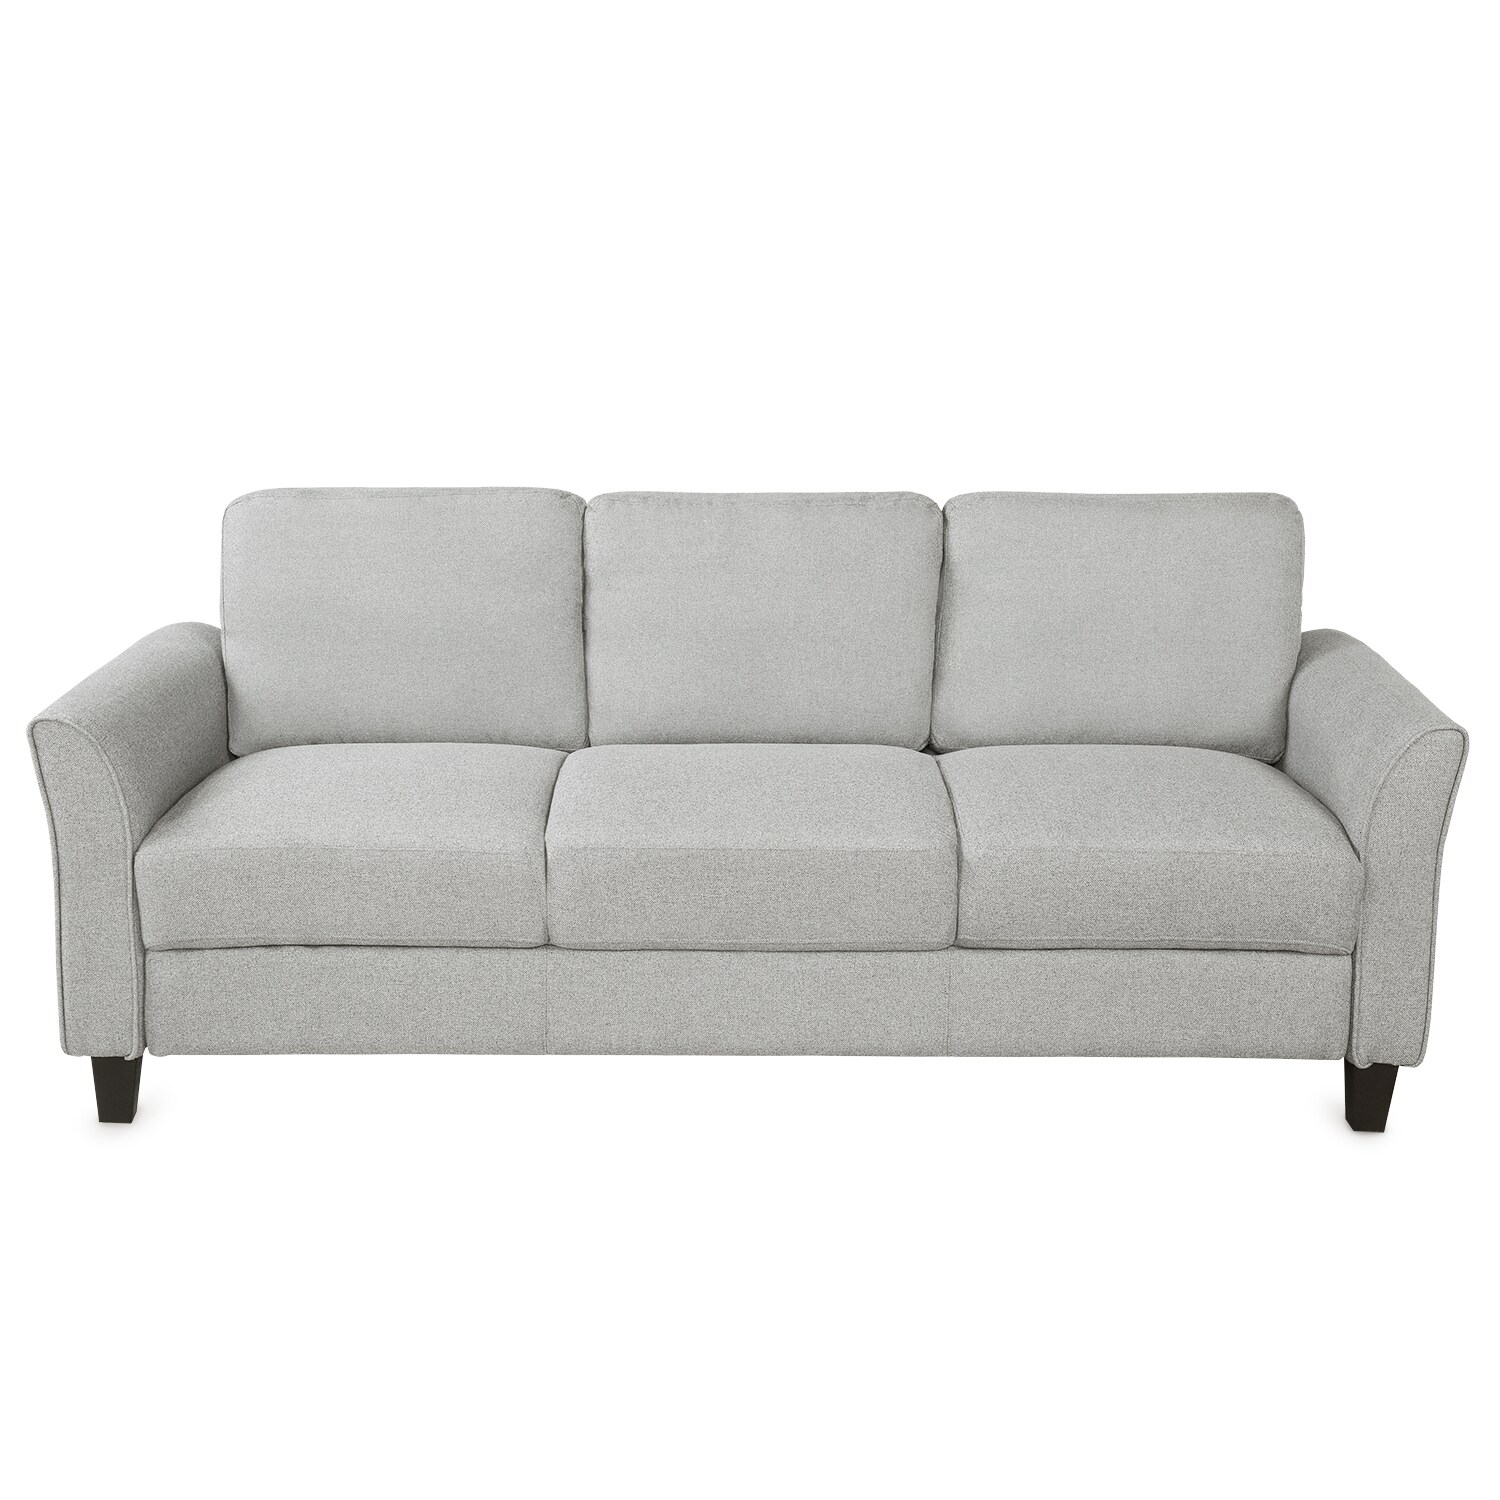 Linen Fabric Upholstered Sofa 3 Seater Removable Back Cushions